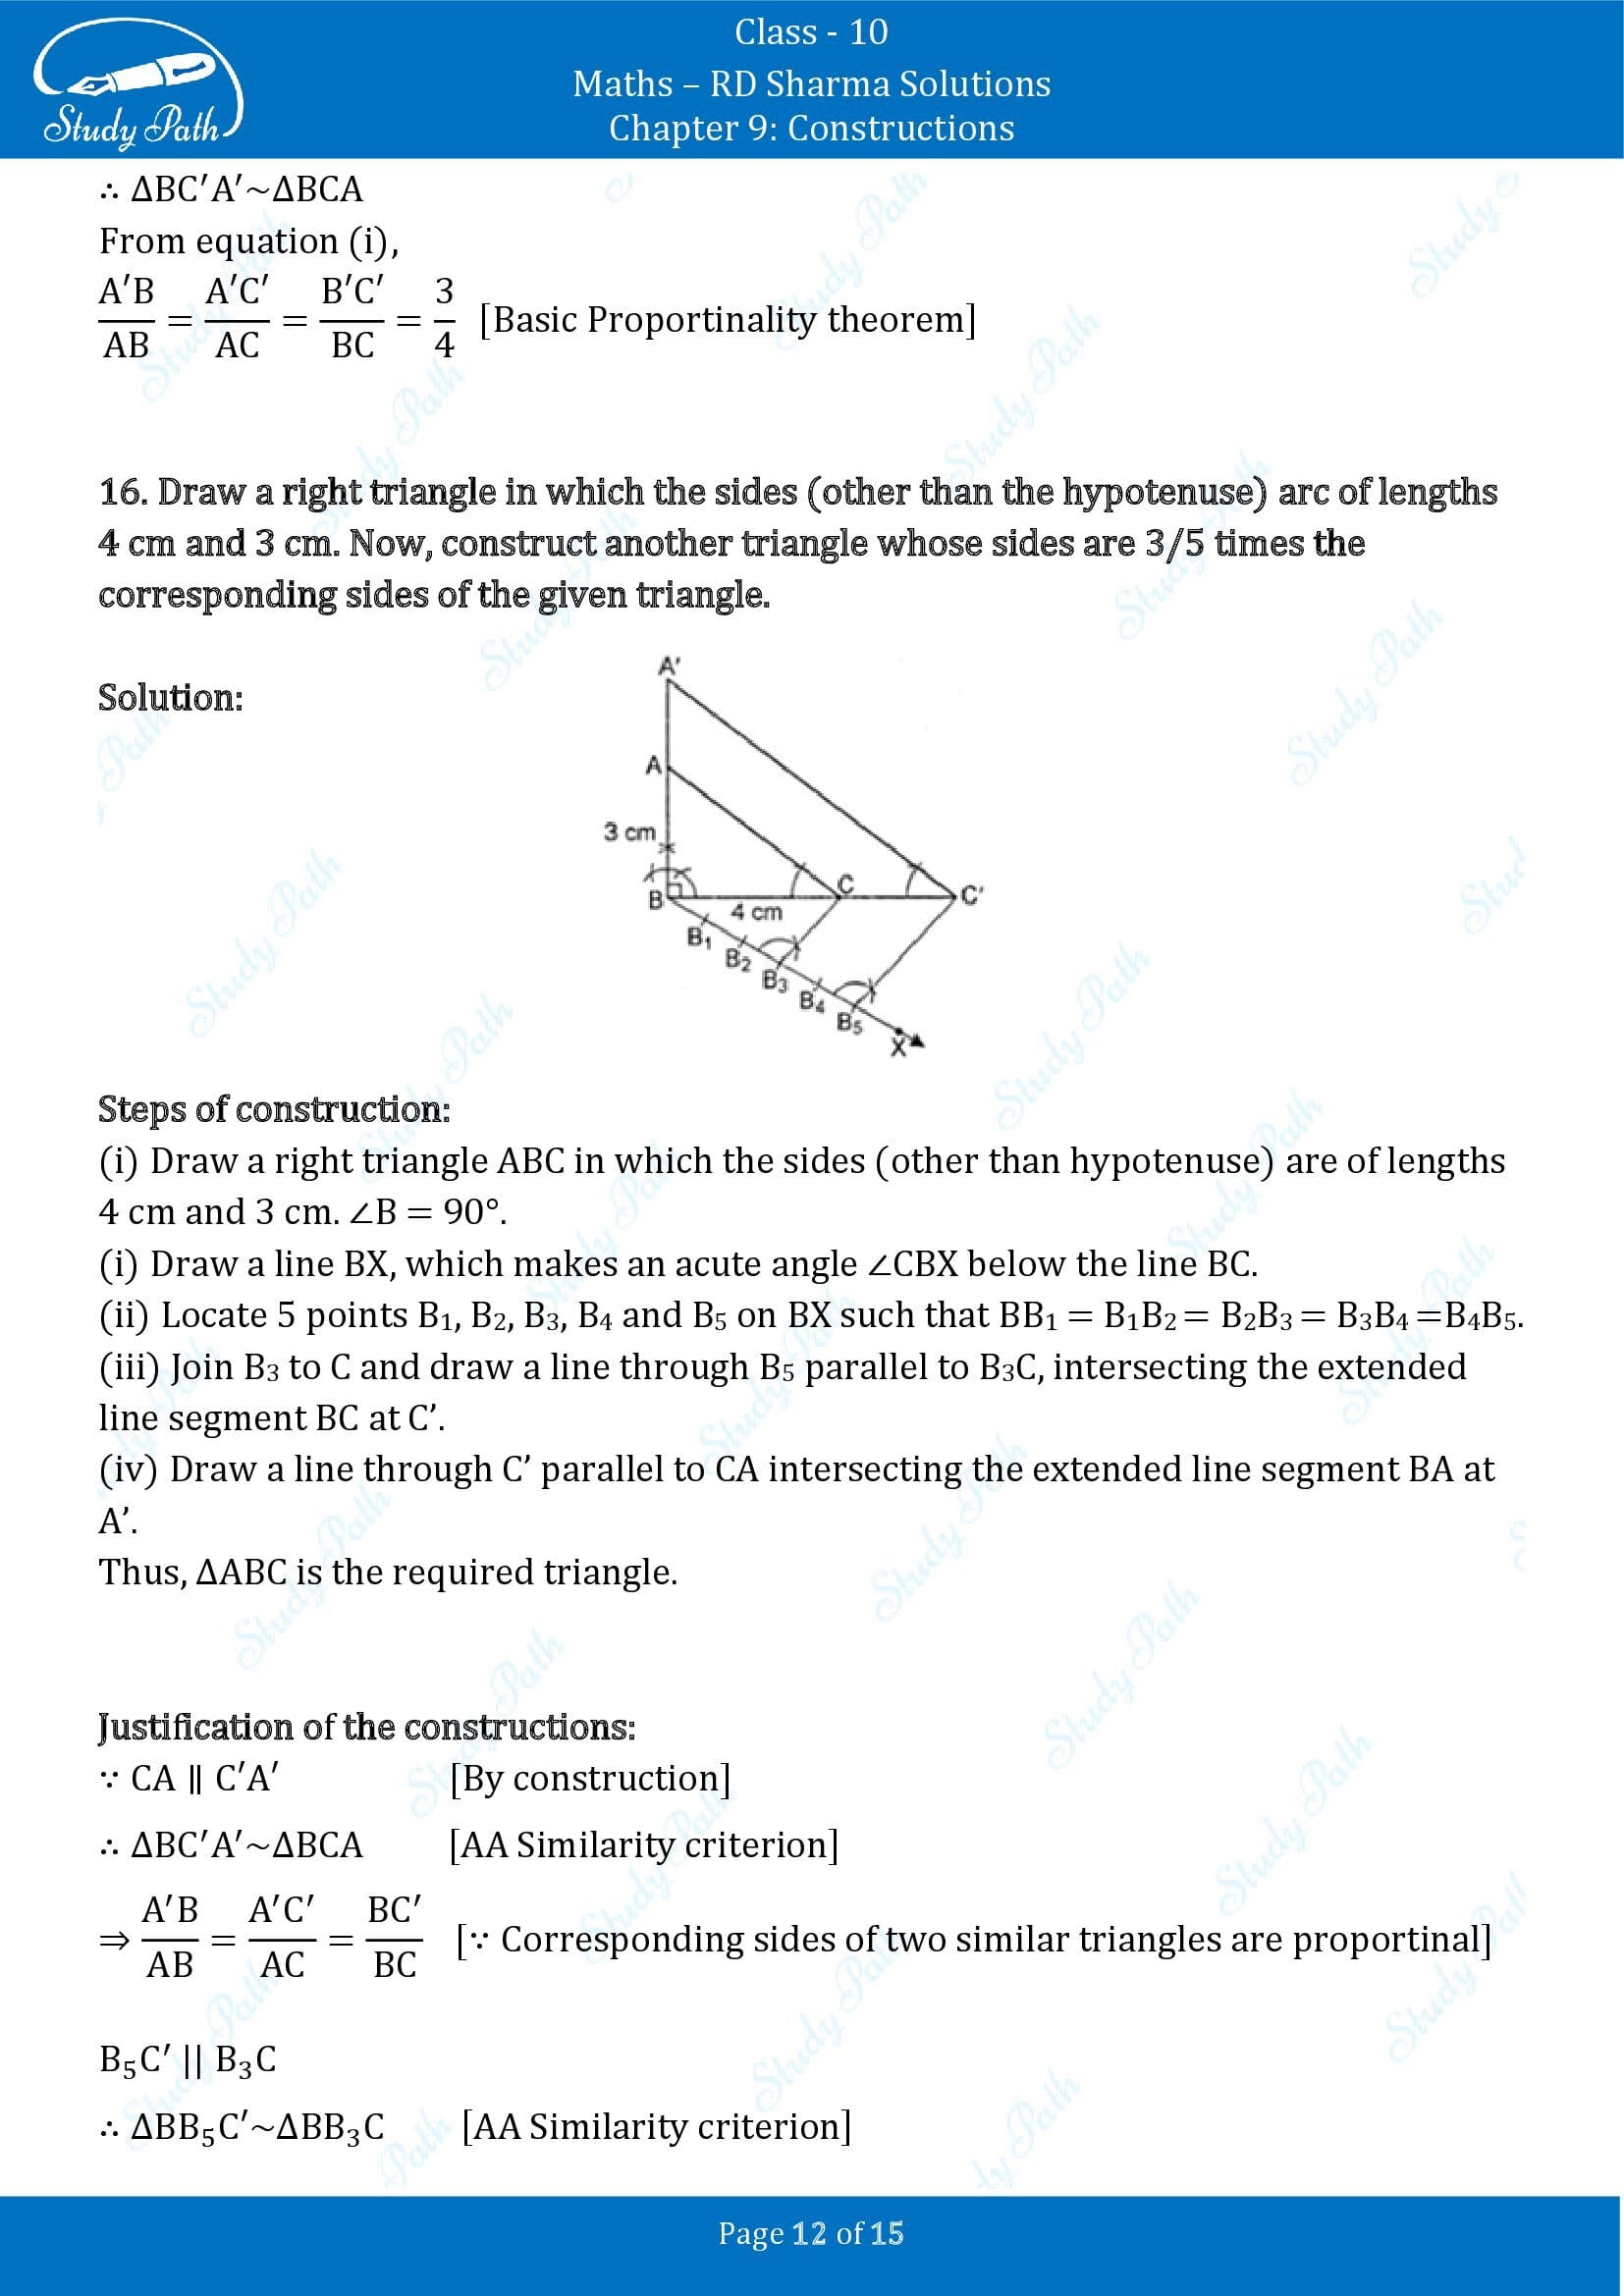 RD Sharma Solutions Class 10 Chapter 9 Constructions Exercise 9.2 00012